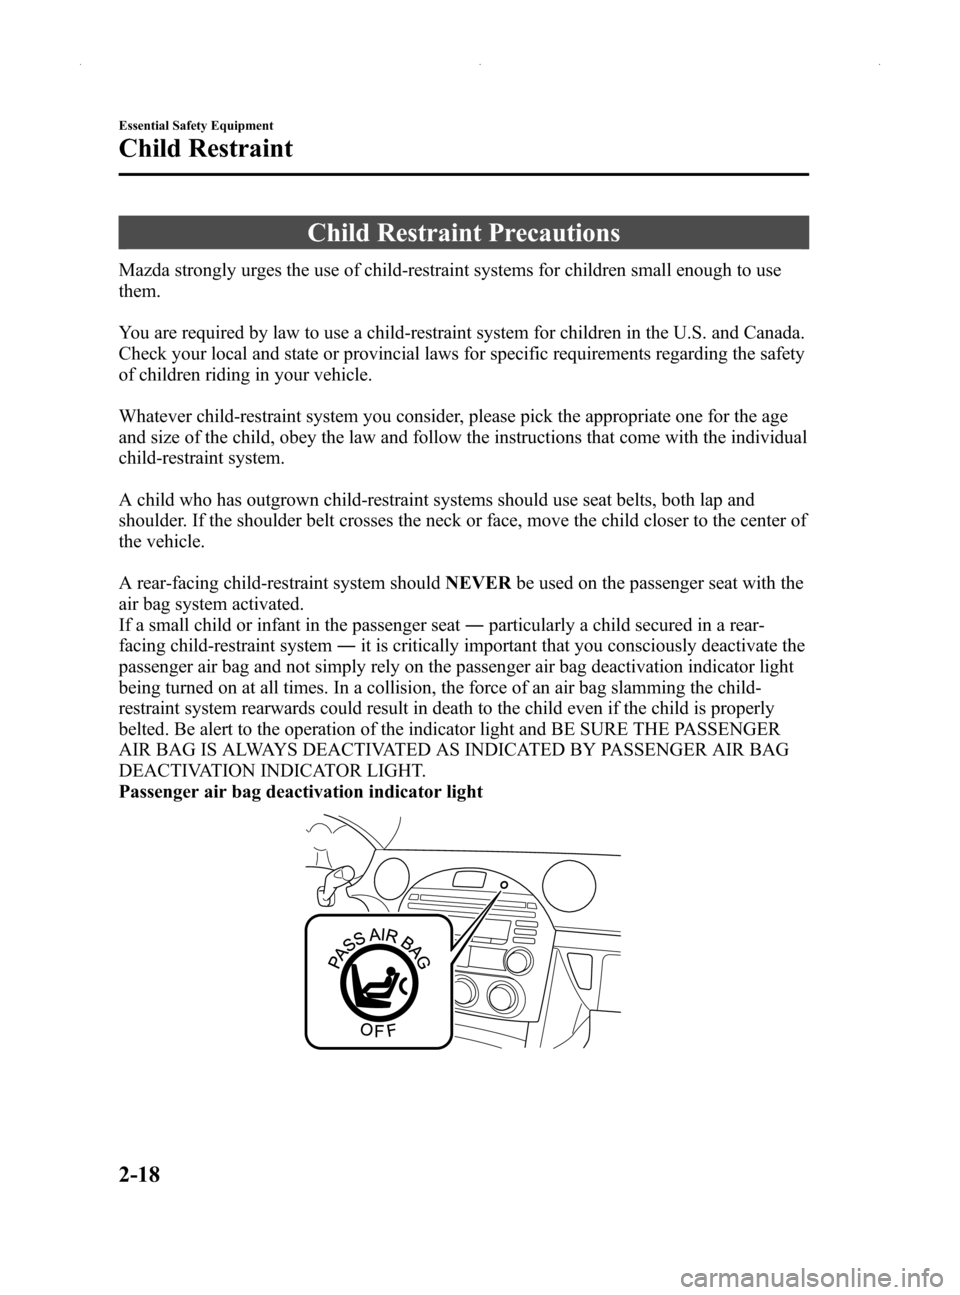 MAZDA MODEL MX-5 2014  Owners Manual (in English) Black plate (30,1)
Child Restraint Precautions
Mazda strongly urges the use of child-restraint systems for children small enough to use
them.
You are required by law to use a child-restraint system fo